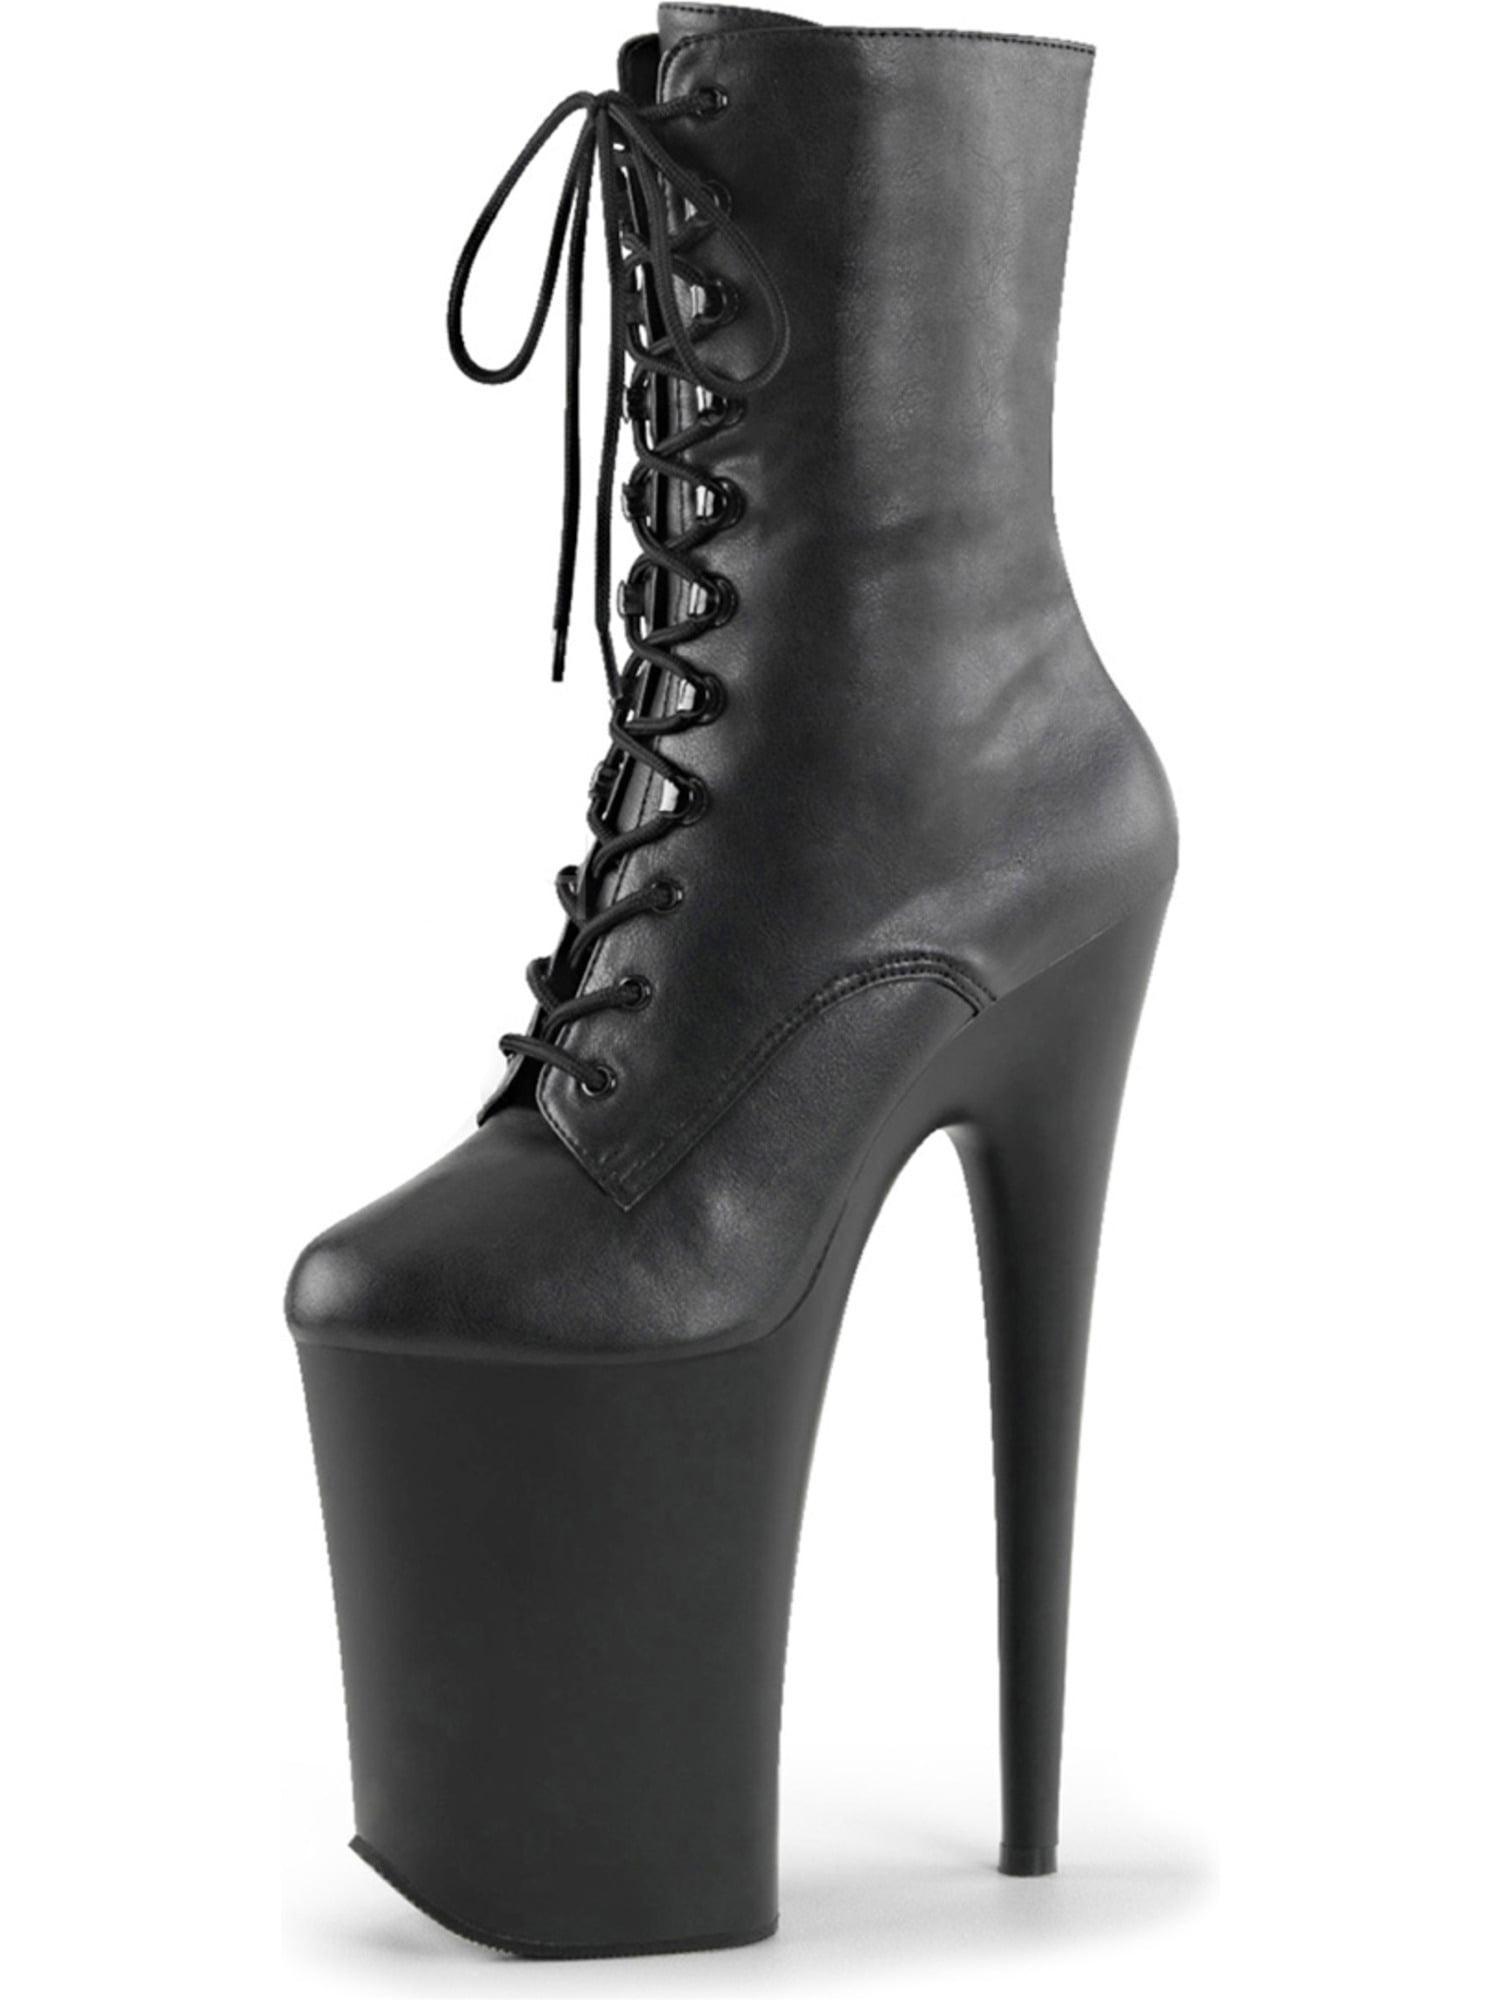 extreme lace up heels